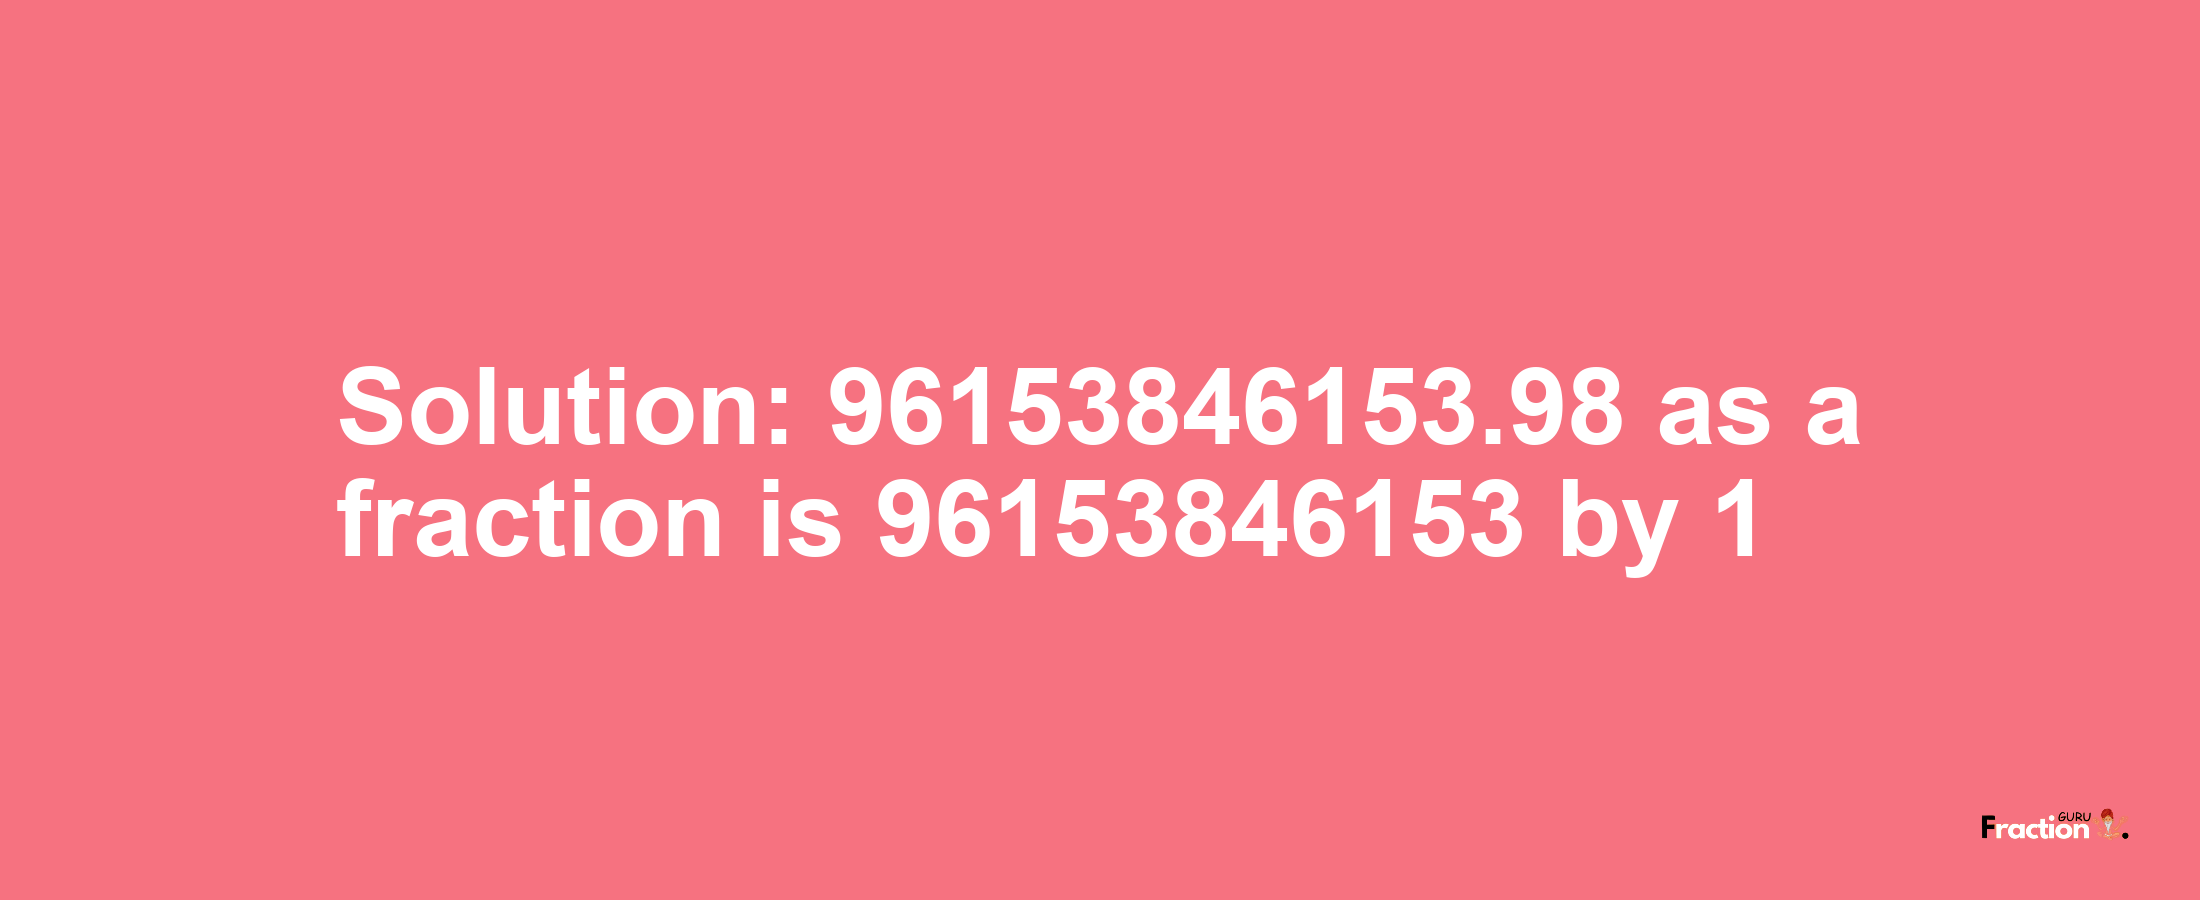 Solution:96153846153.98 as a fraction is 96153846153/1